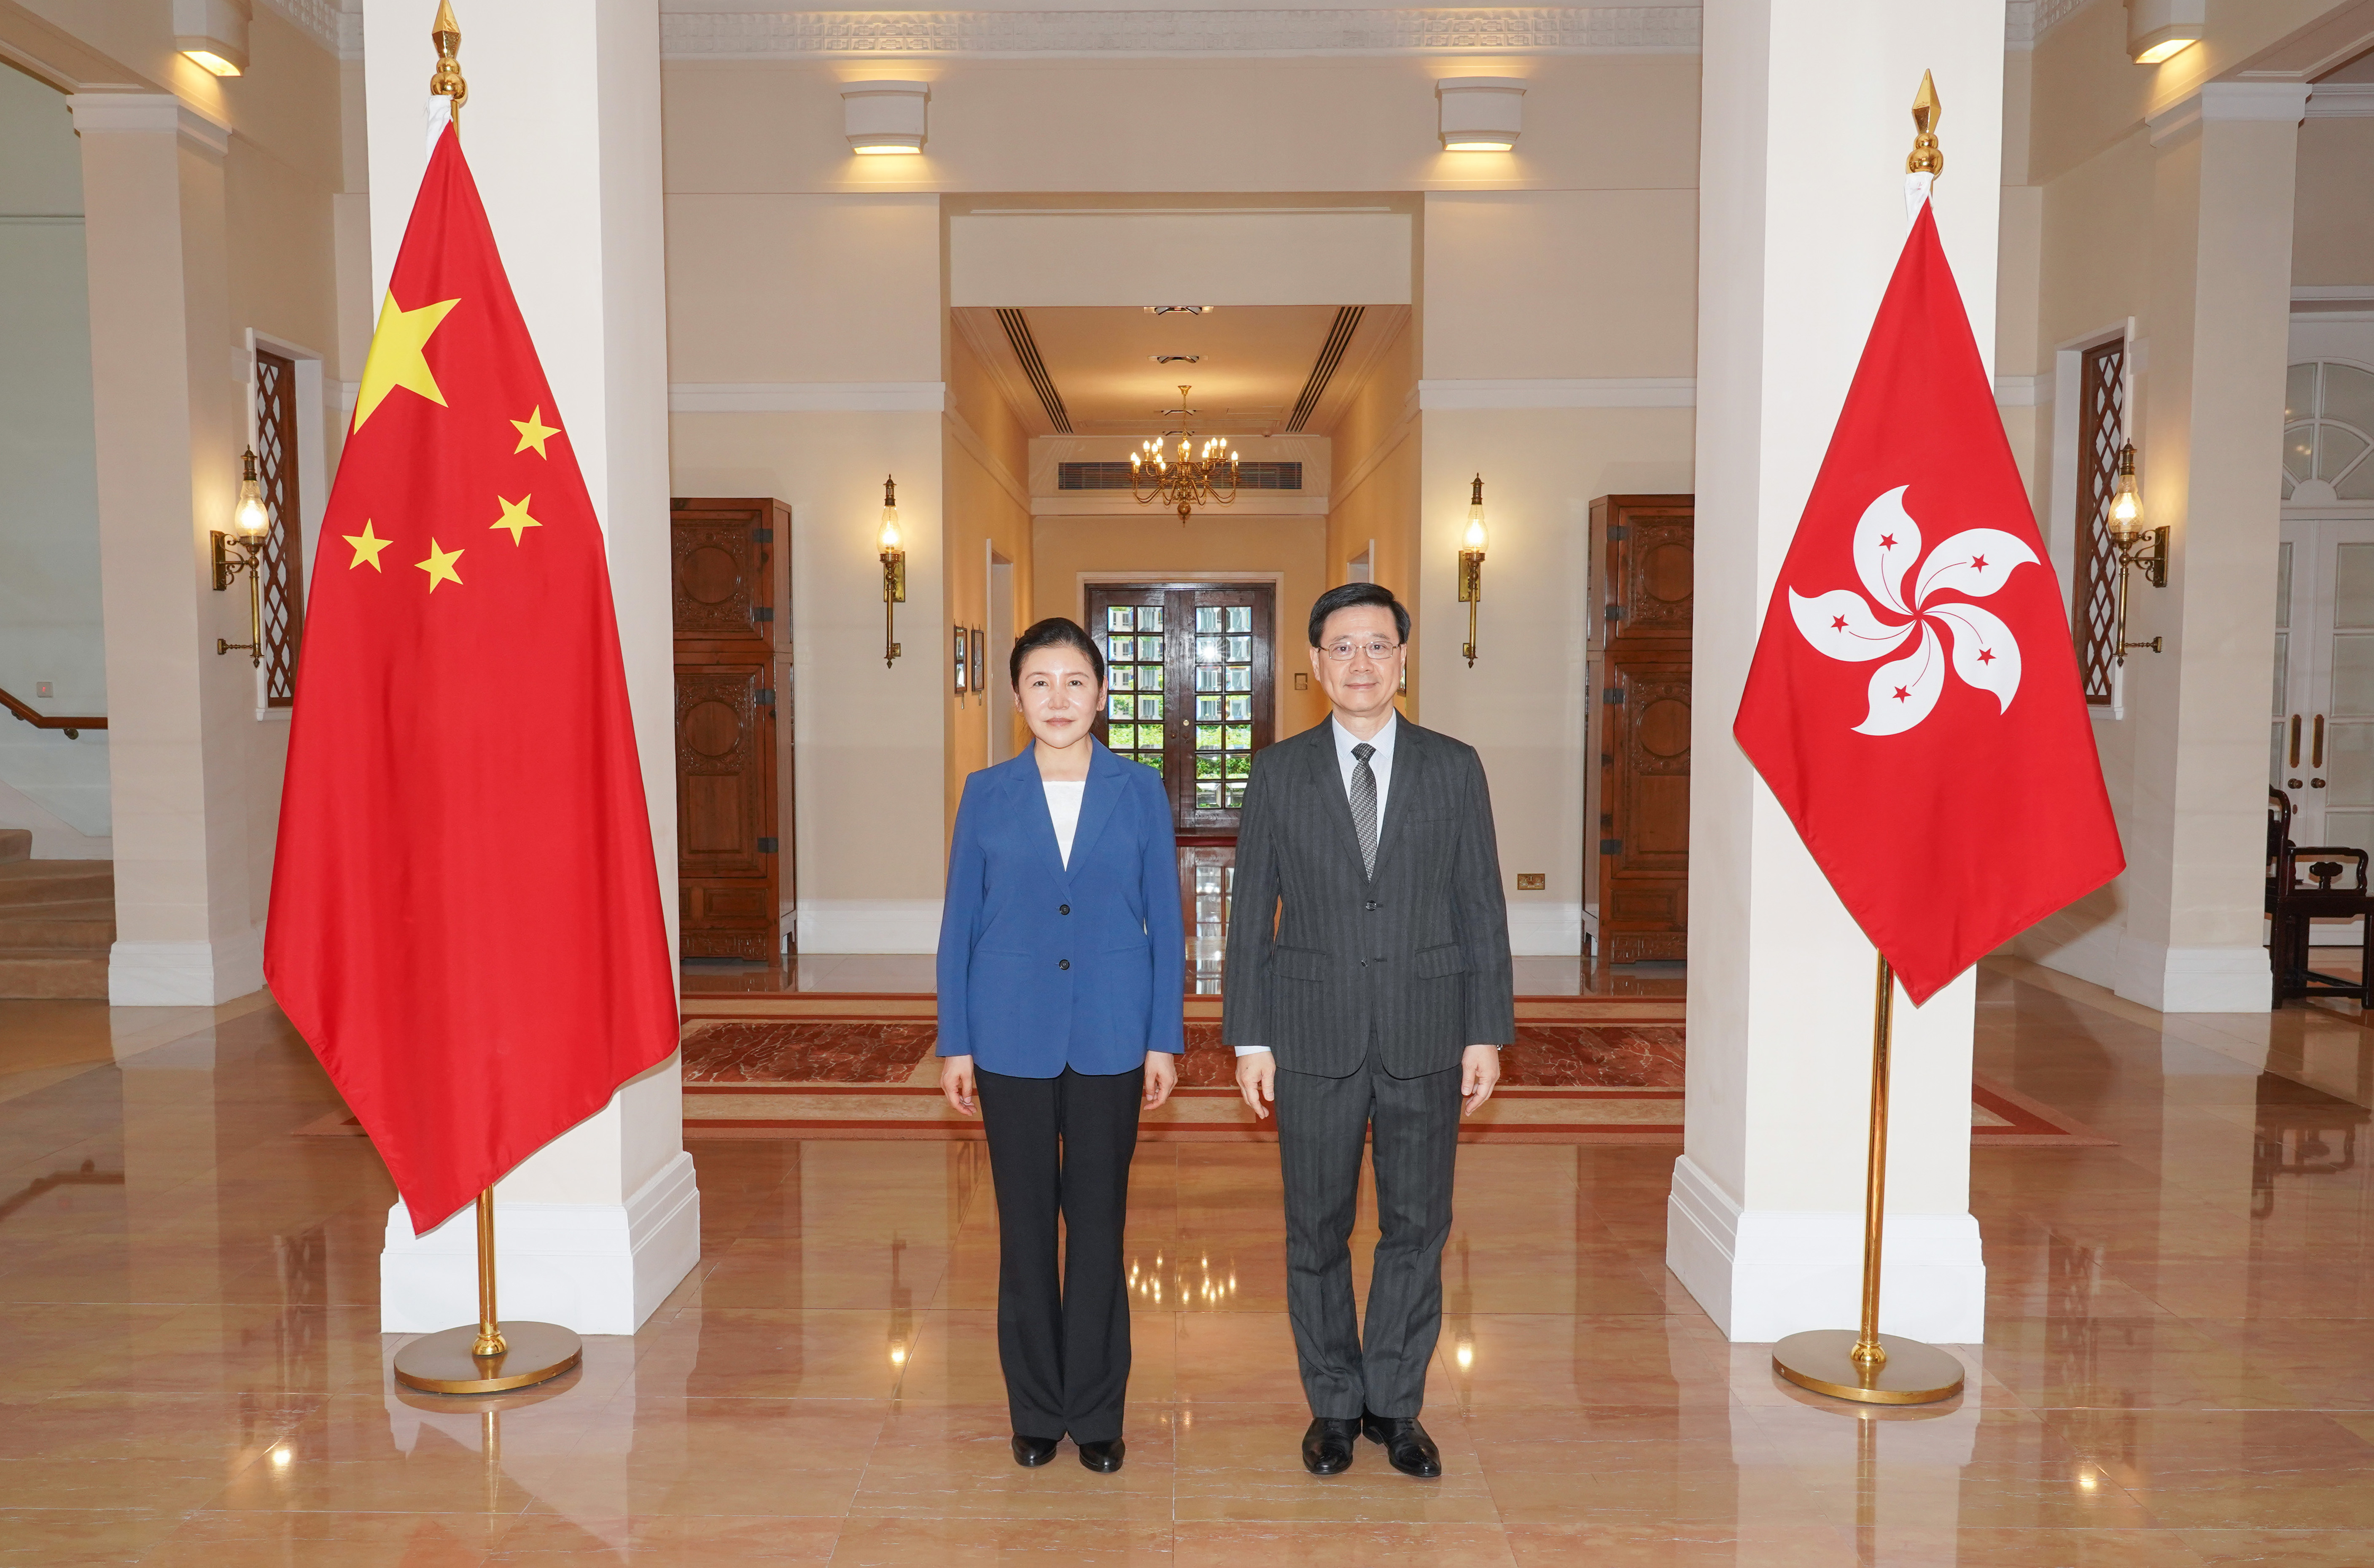 The Chief Executive, Mr John Lee, met the Minister of Justice, Ms He Rong, at Government House on July 17. Photo shows Mr Lee (right) and Ms He (left).